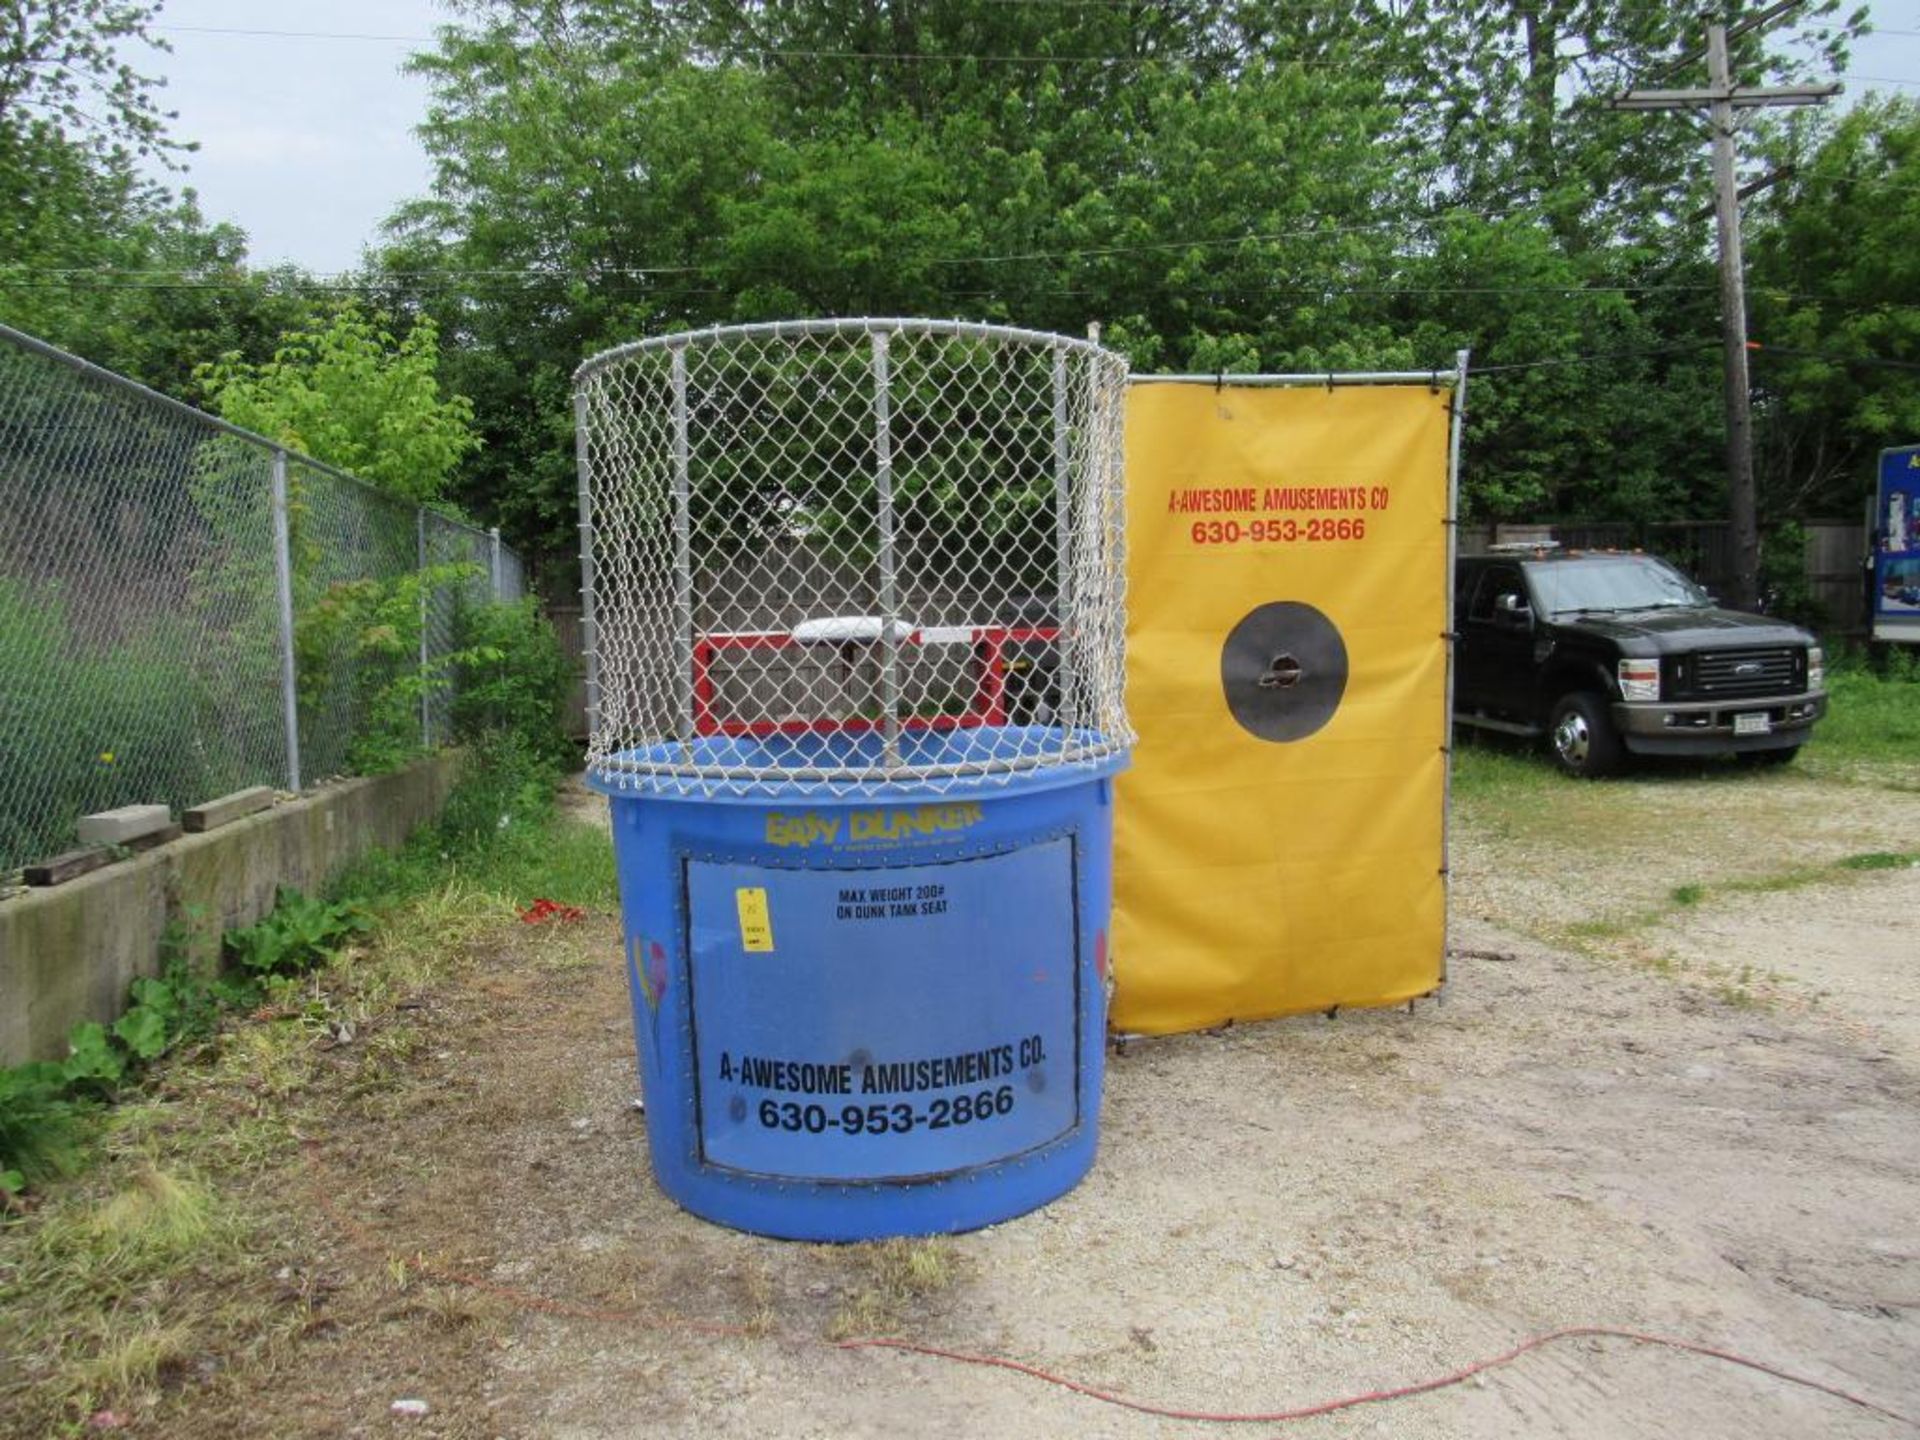 Dunk Tank Trailer mounted - includes bucket of balls, target and activation arm. See Lot 24A Misc. D